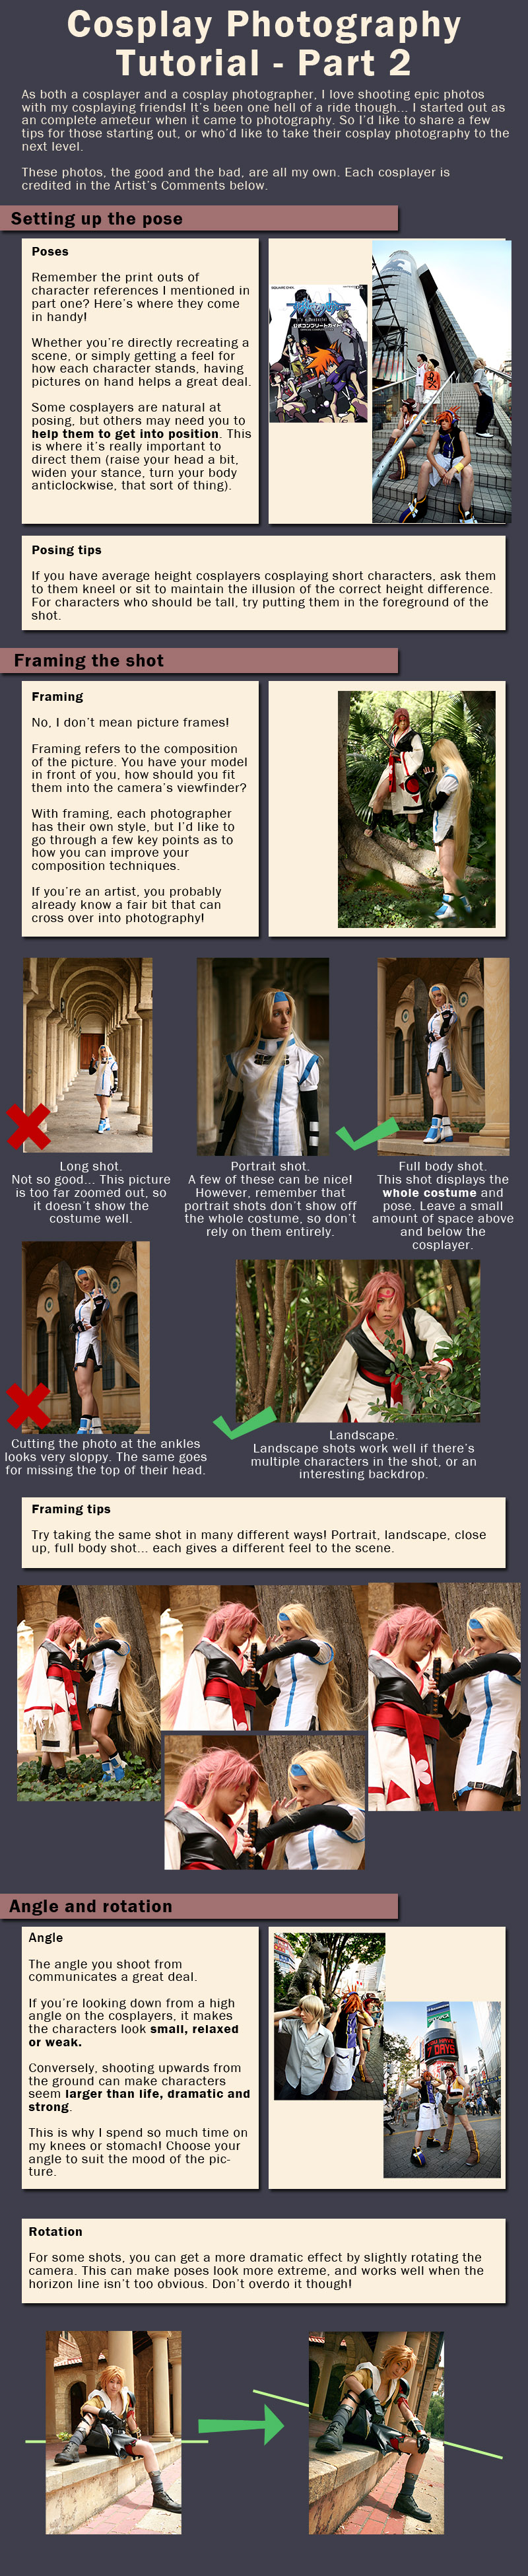 Cosplay Photography Tutorial 2